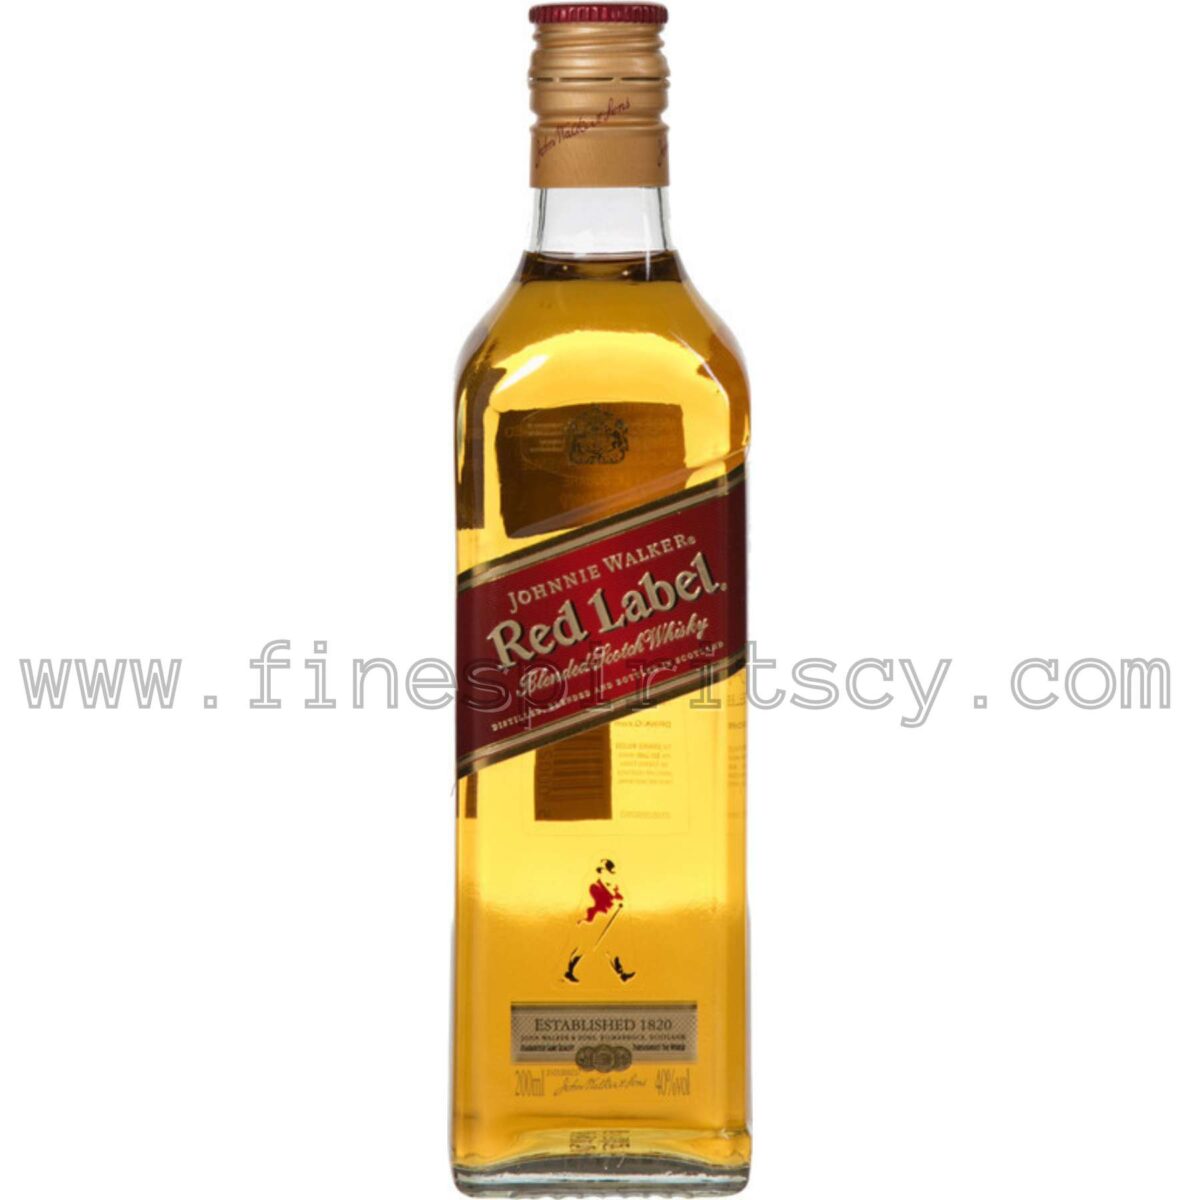 Johnnie Walker Red Label 200ml 20cl 0.2L Cyprus Price Whisky Whiskey CY